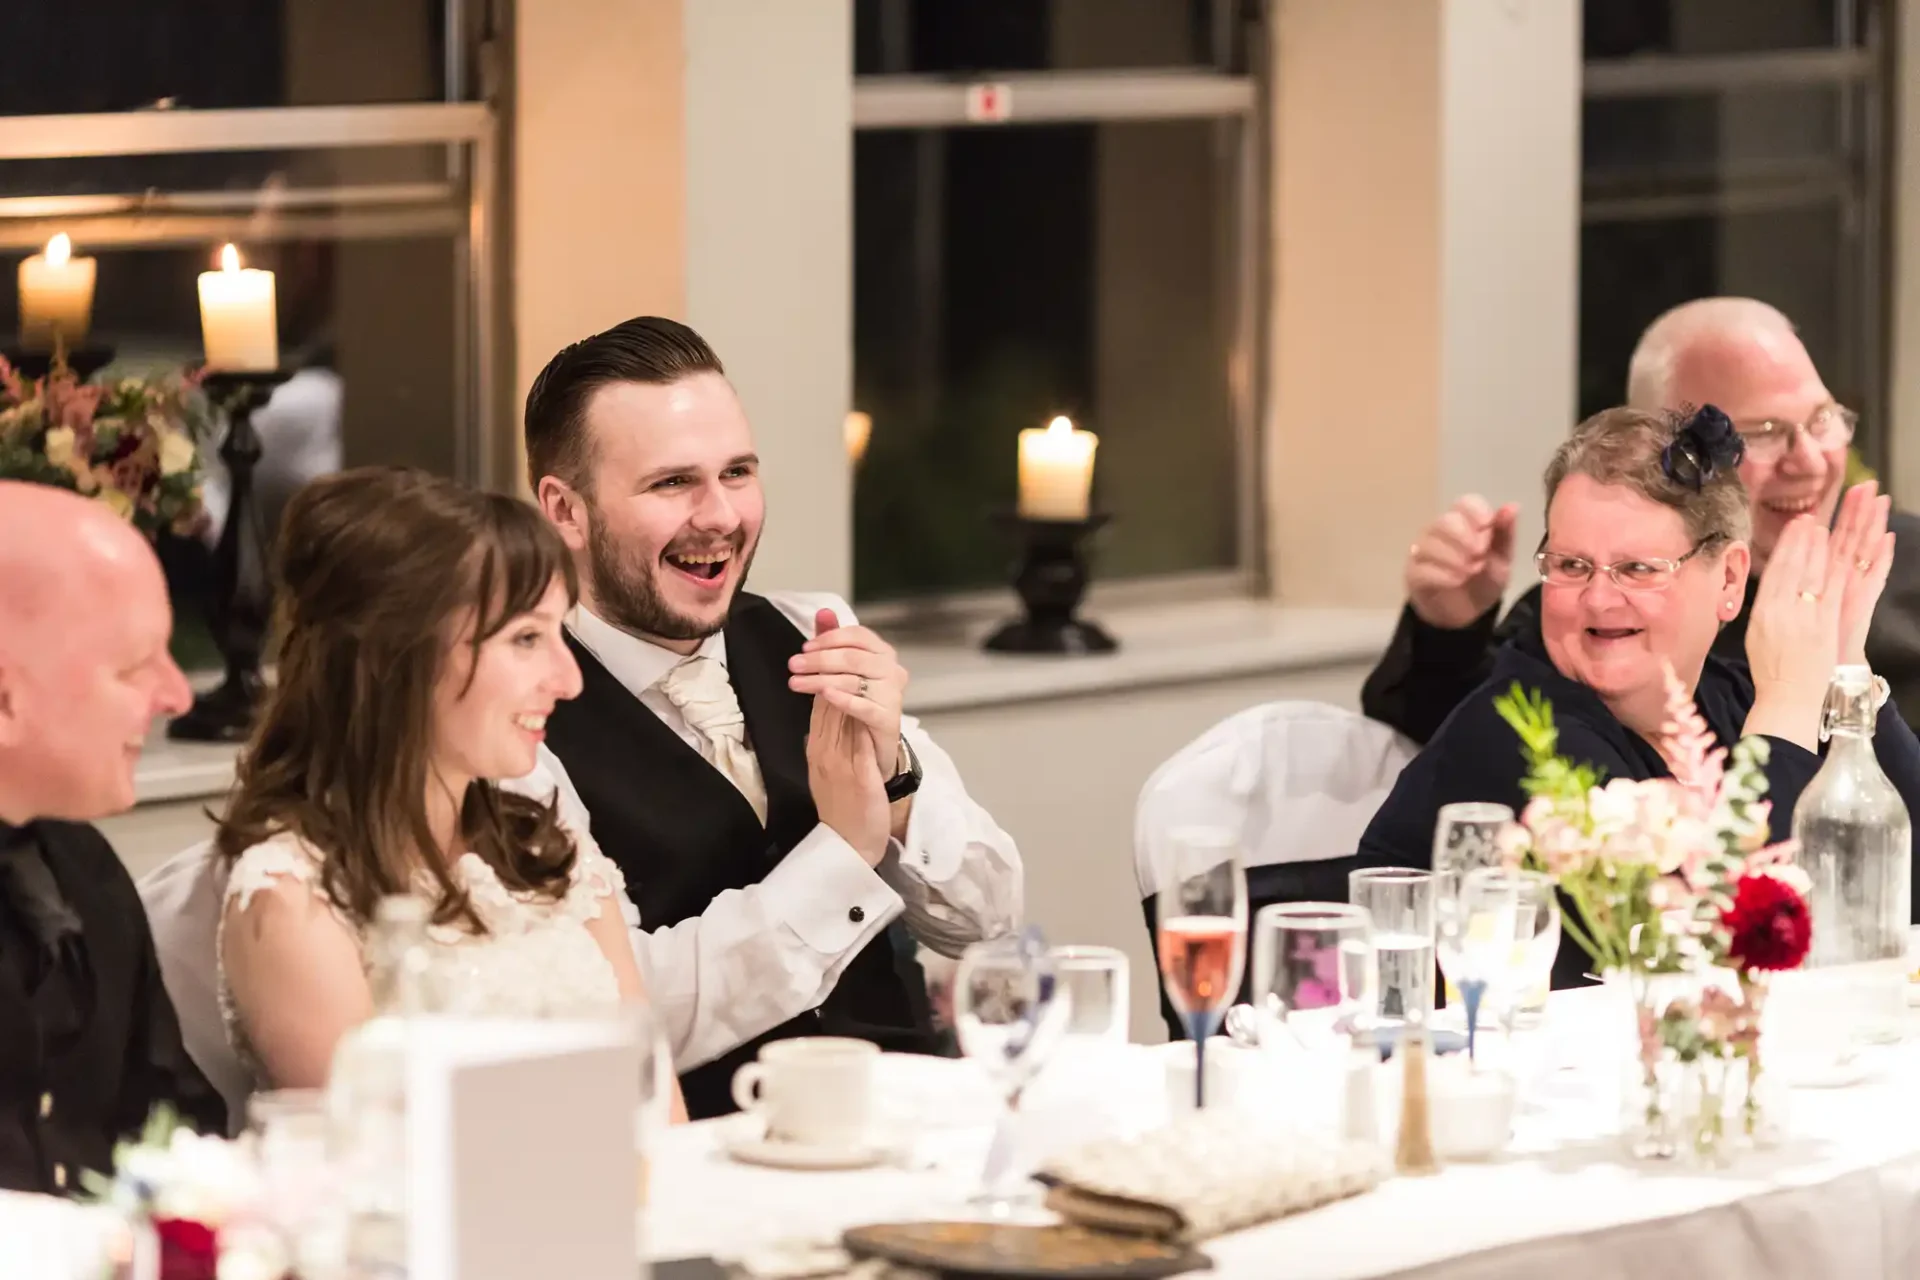 A bride and groom laughing at a wedding reception table, surrounded by joyful guests clapping and enjoying the evening.